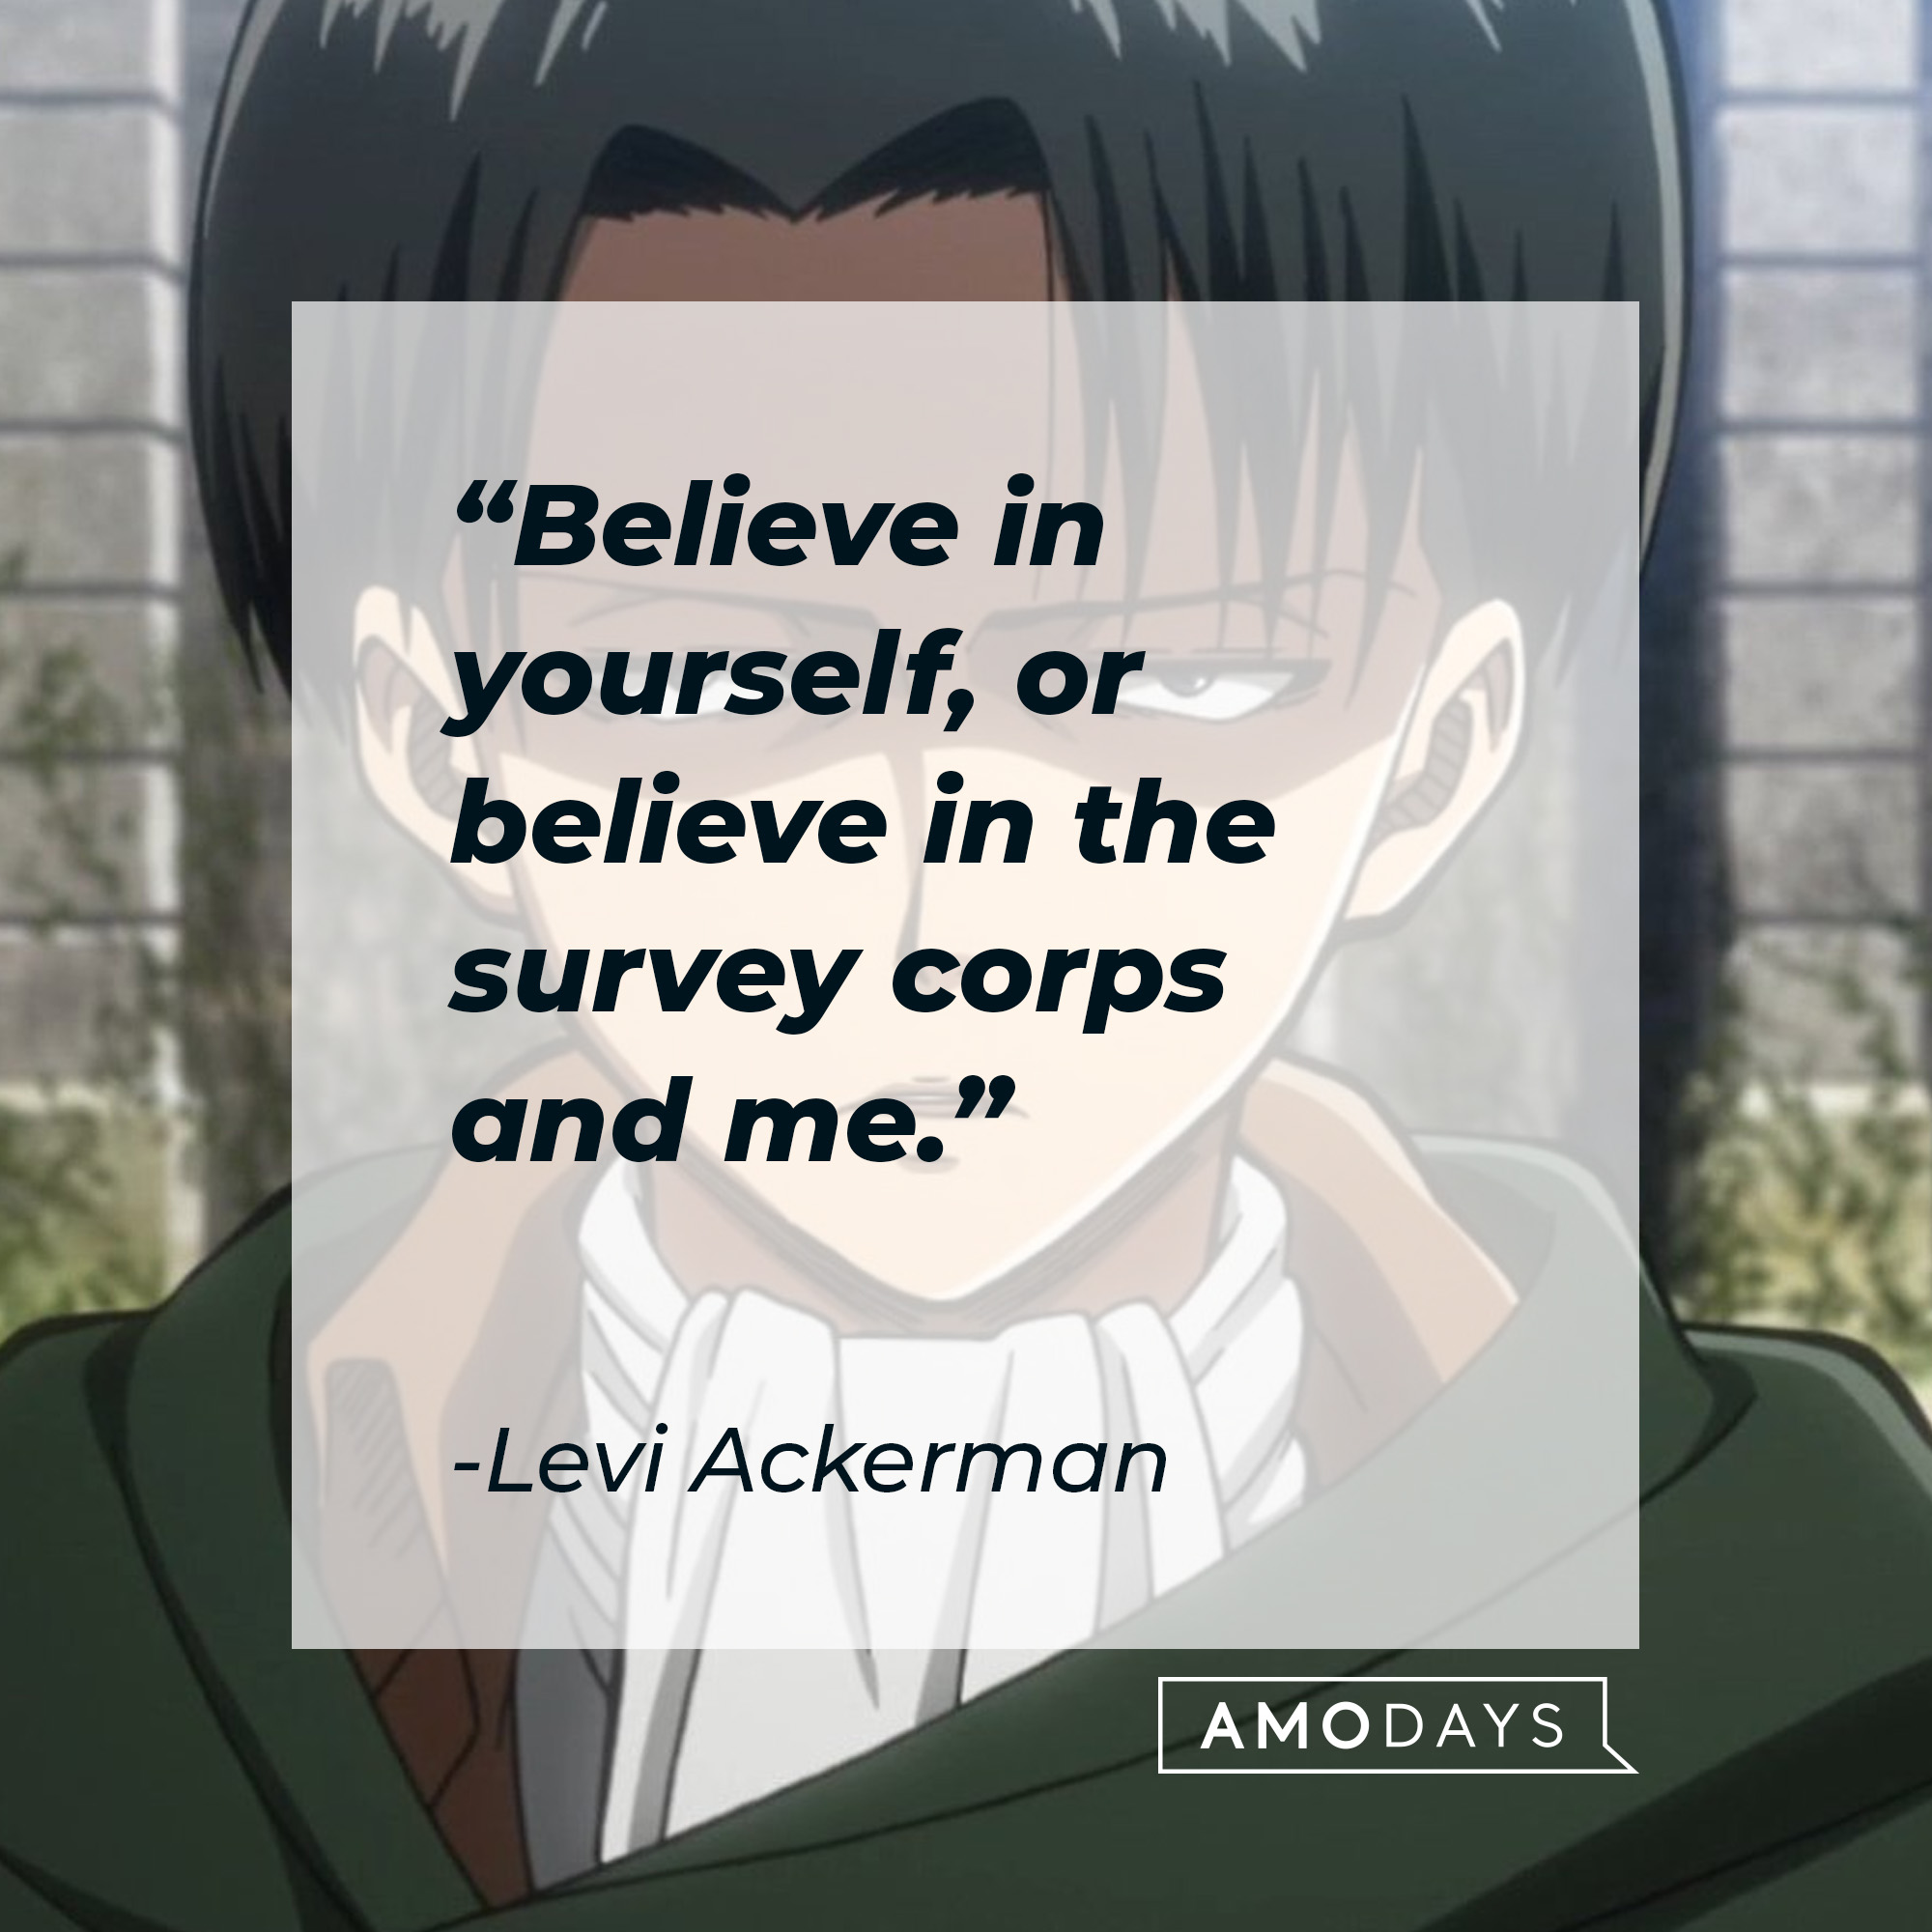 Levi Ackerman, with his quote: “Believe in yourself, or believe in the survey corps and me.” │Source: facebook.com/AttackOnTitan